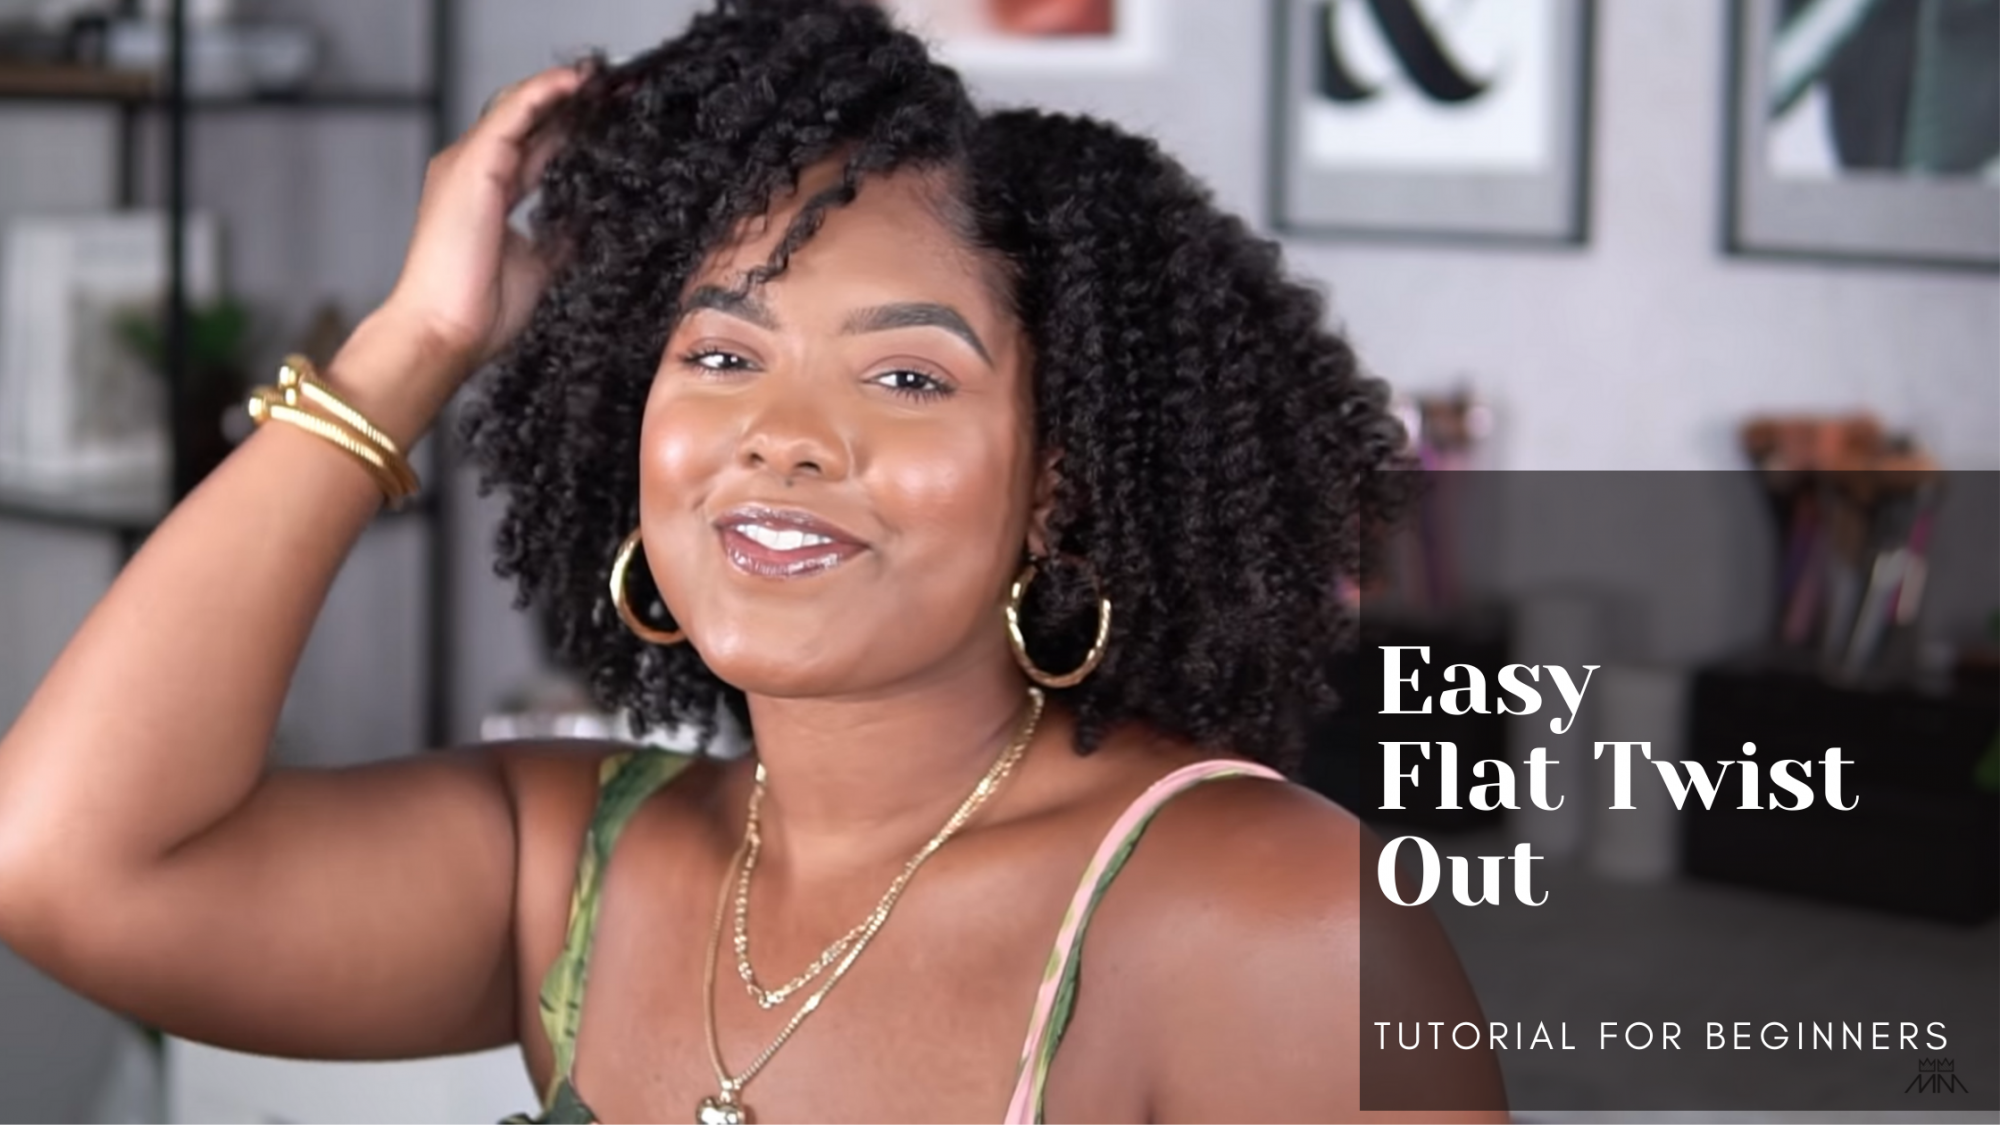 Easy flat twist out tutorial